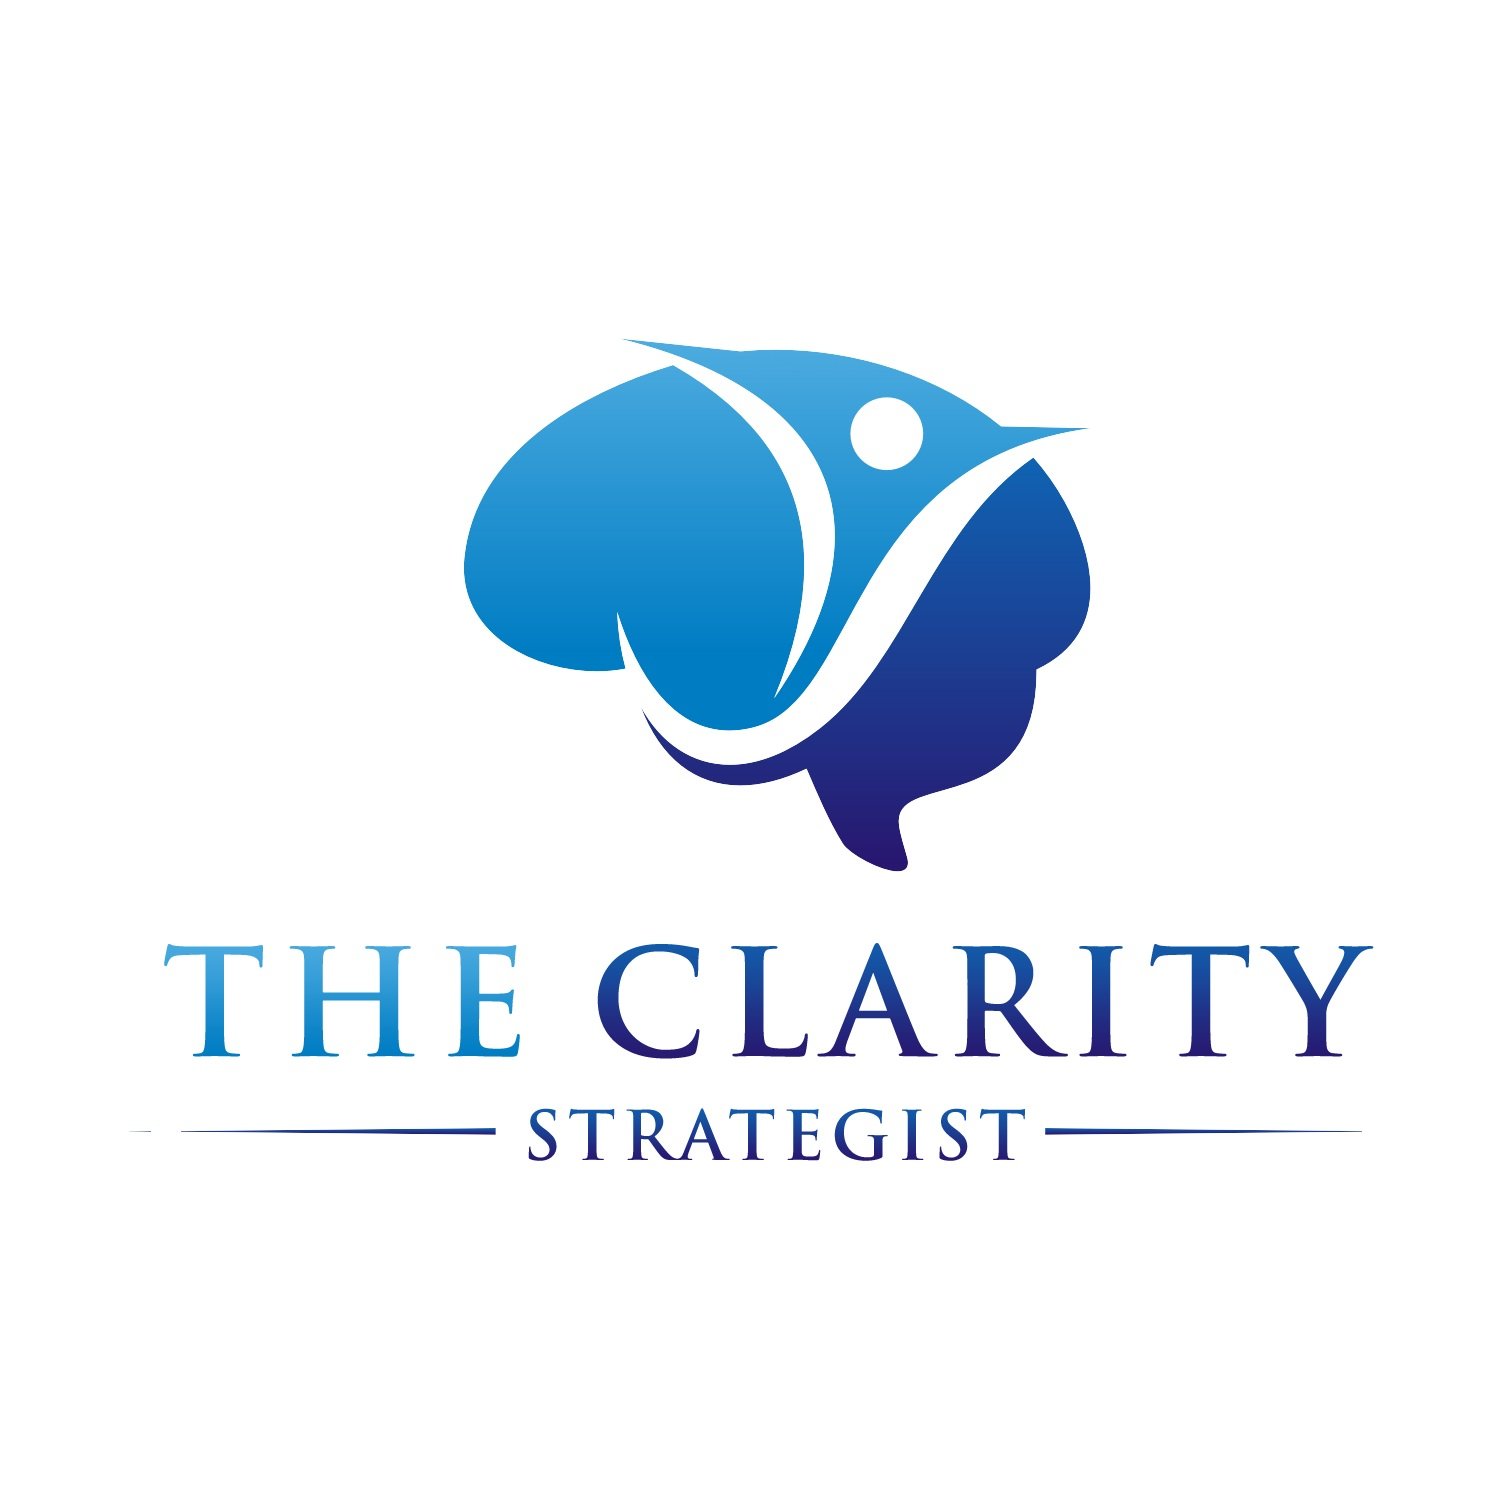 The Clarity Strategist